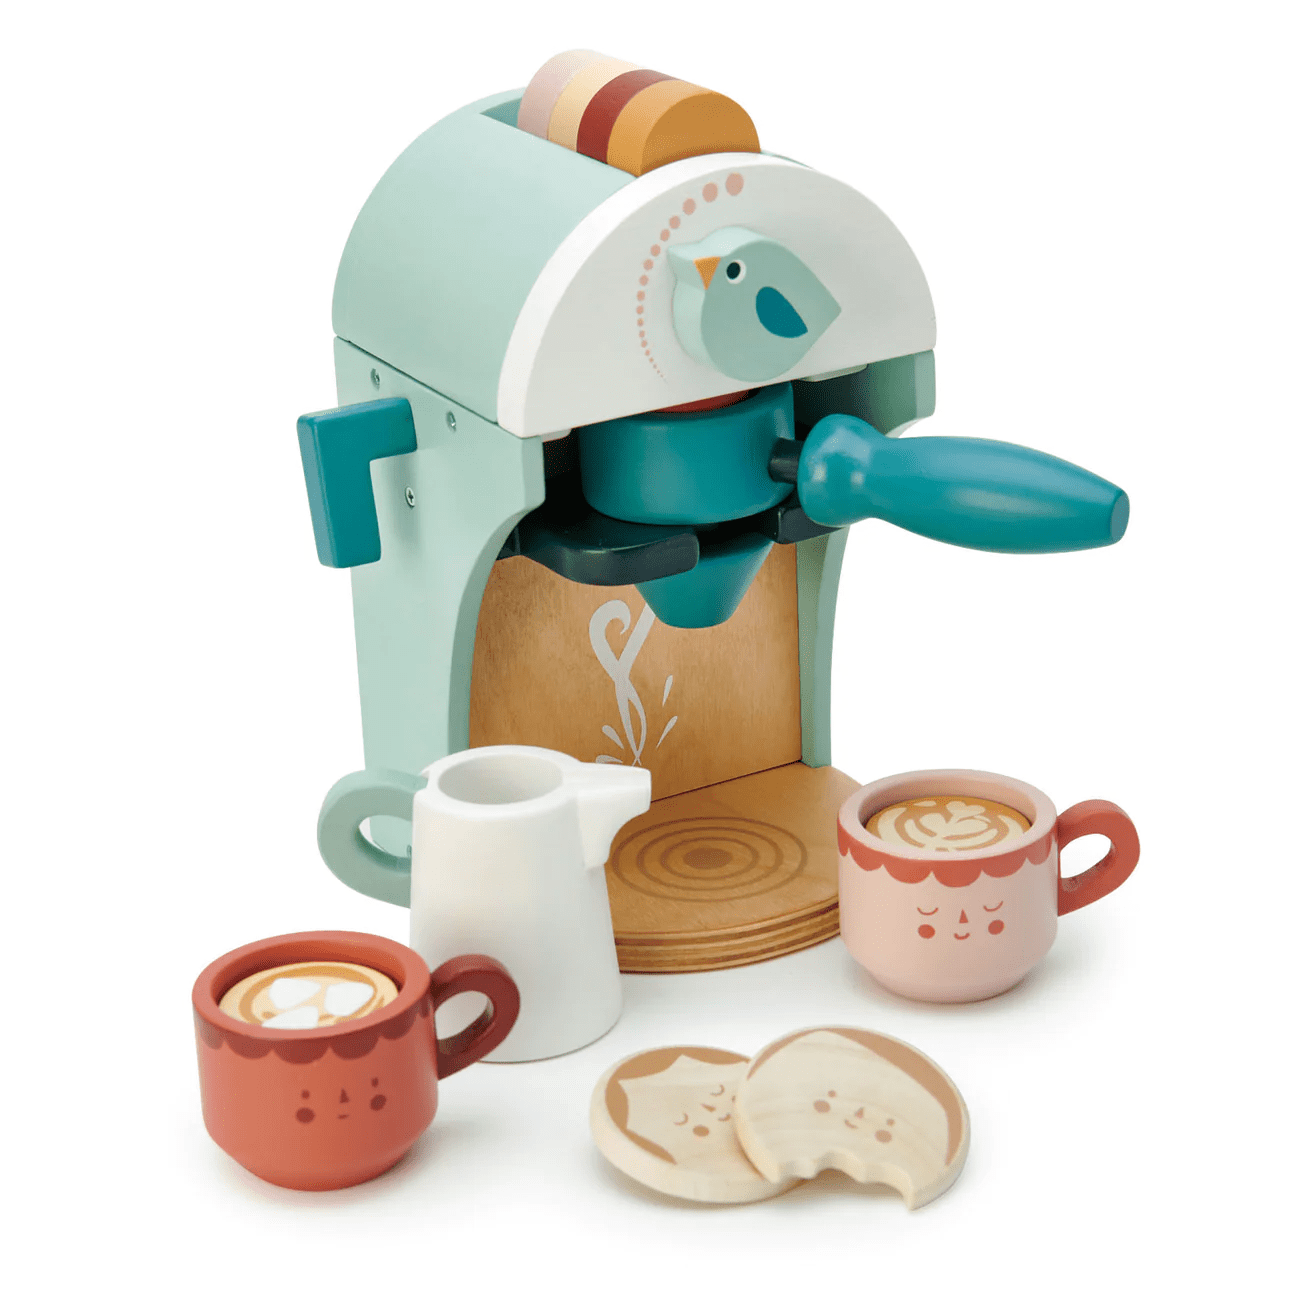 Babyccino Maker | Tender Leaf Toys | Iris Gifts & Décor